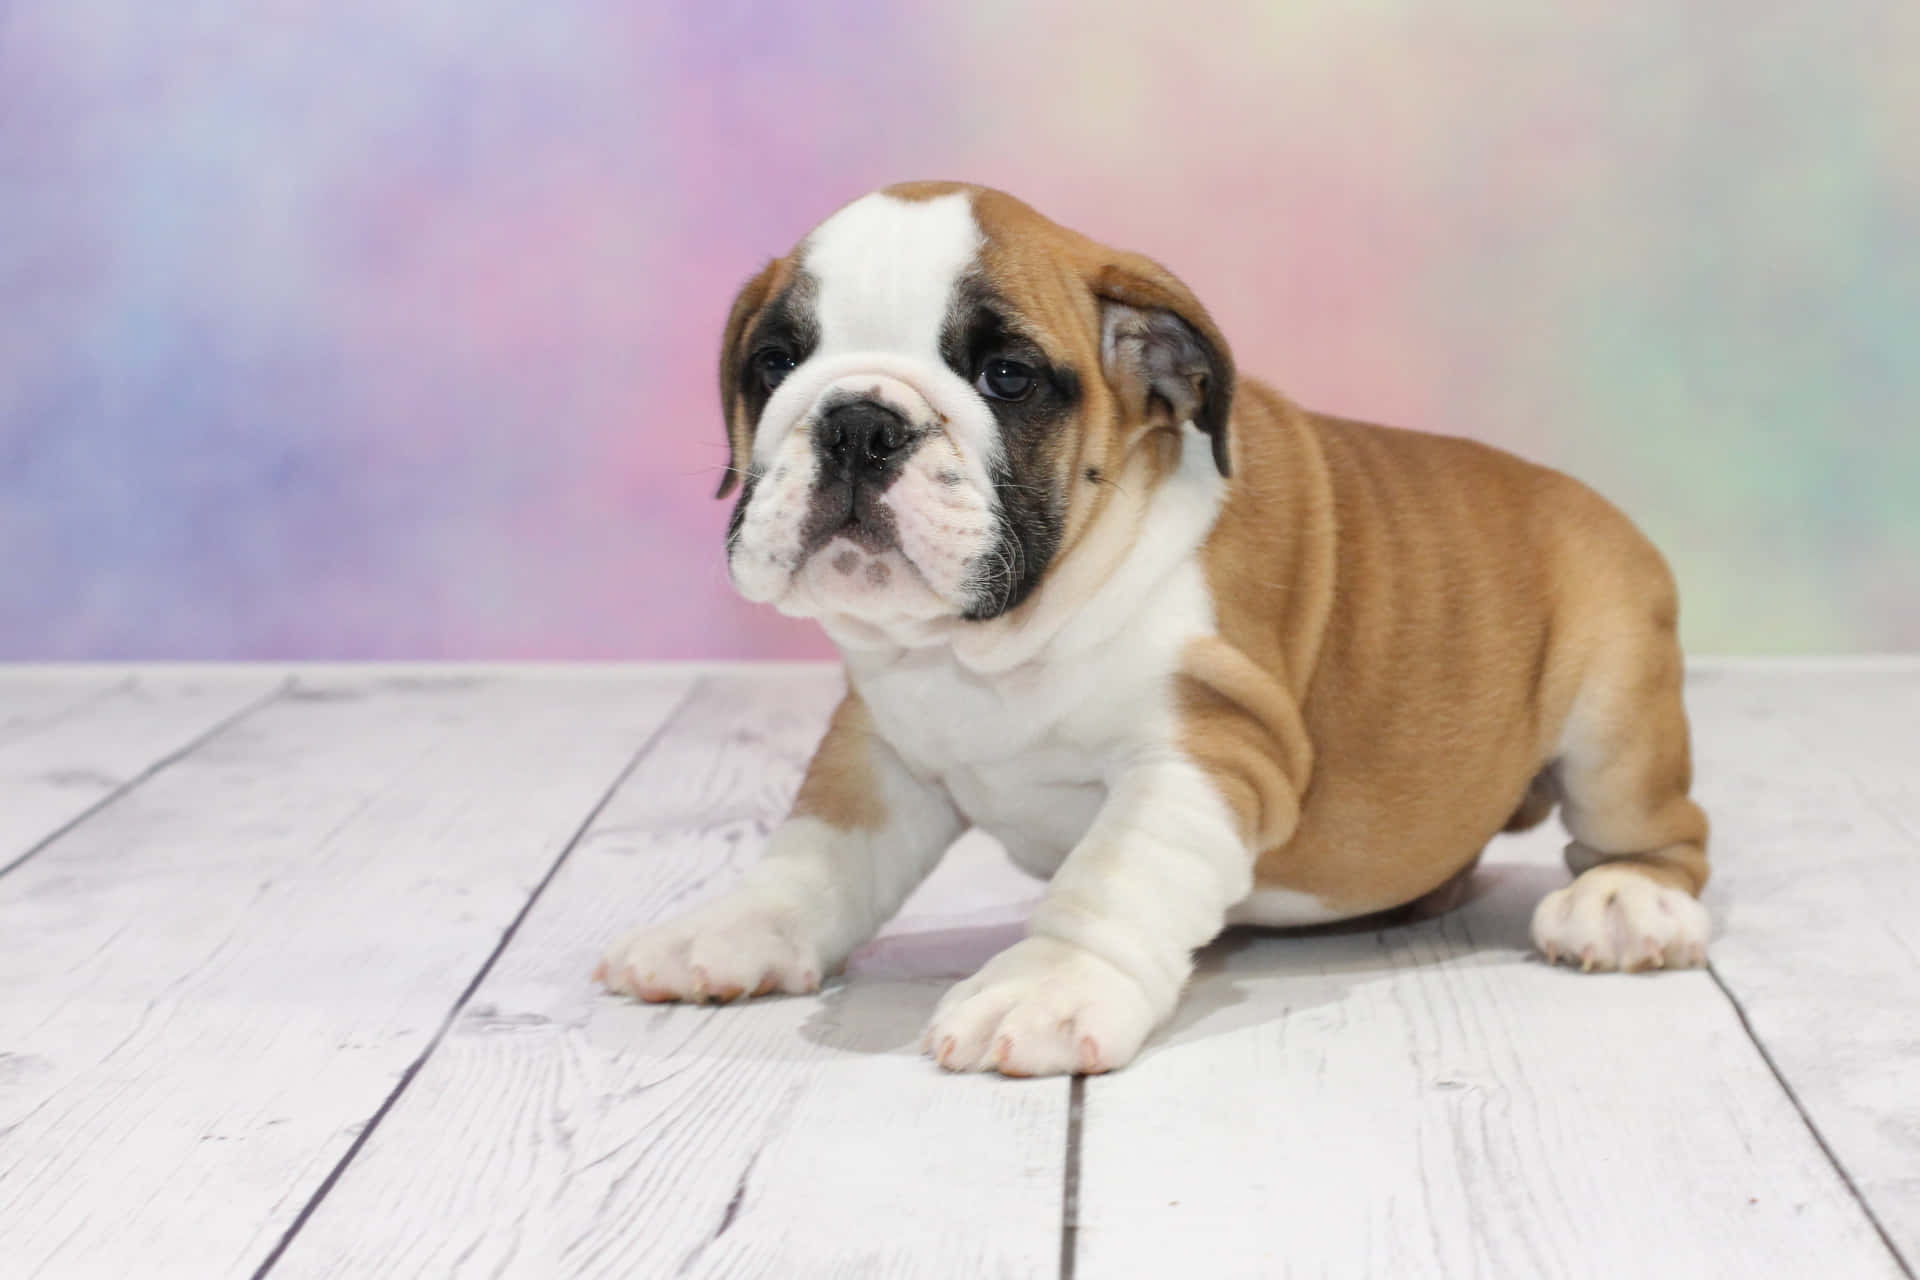 A Small Bulldog Puppy Is Sitting On A White Floor